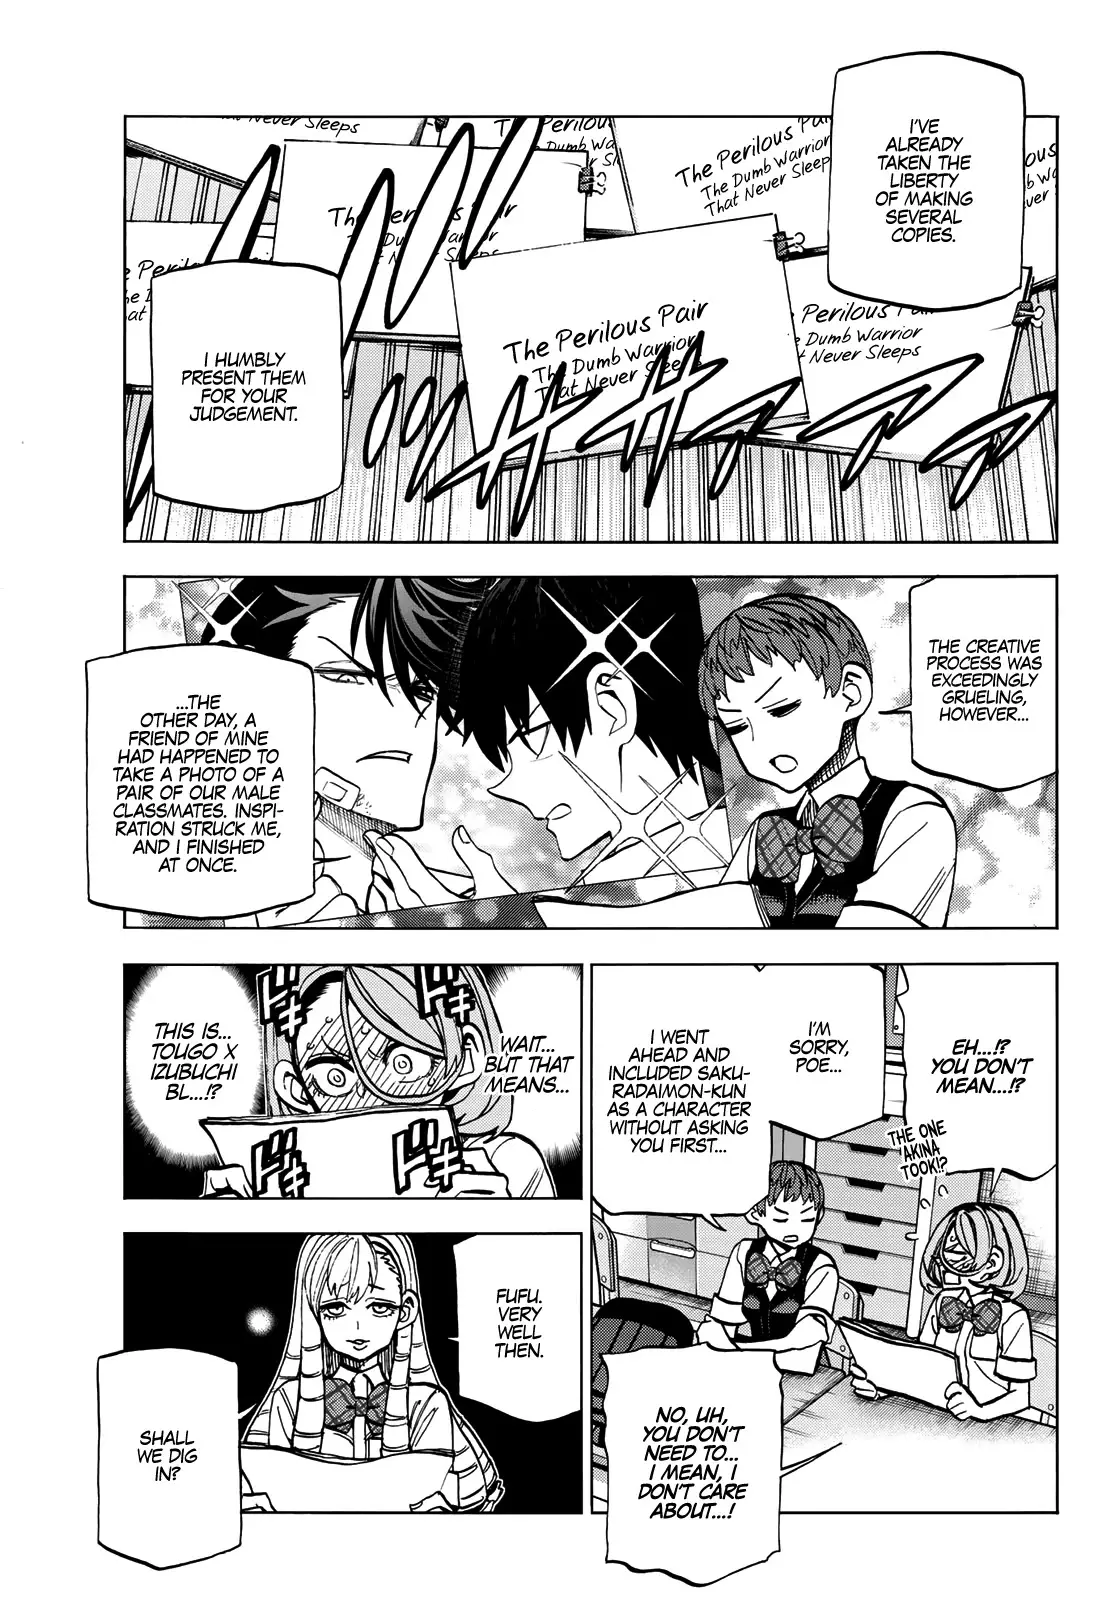 The Story Between A Dumb Prefect And A High School Girl With An Inappropriate Skirt Length - 15 page 8